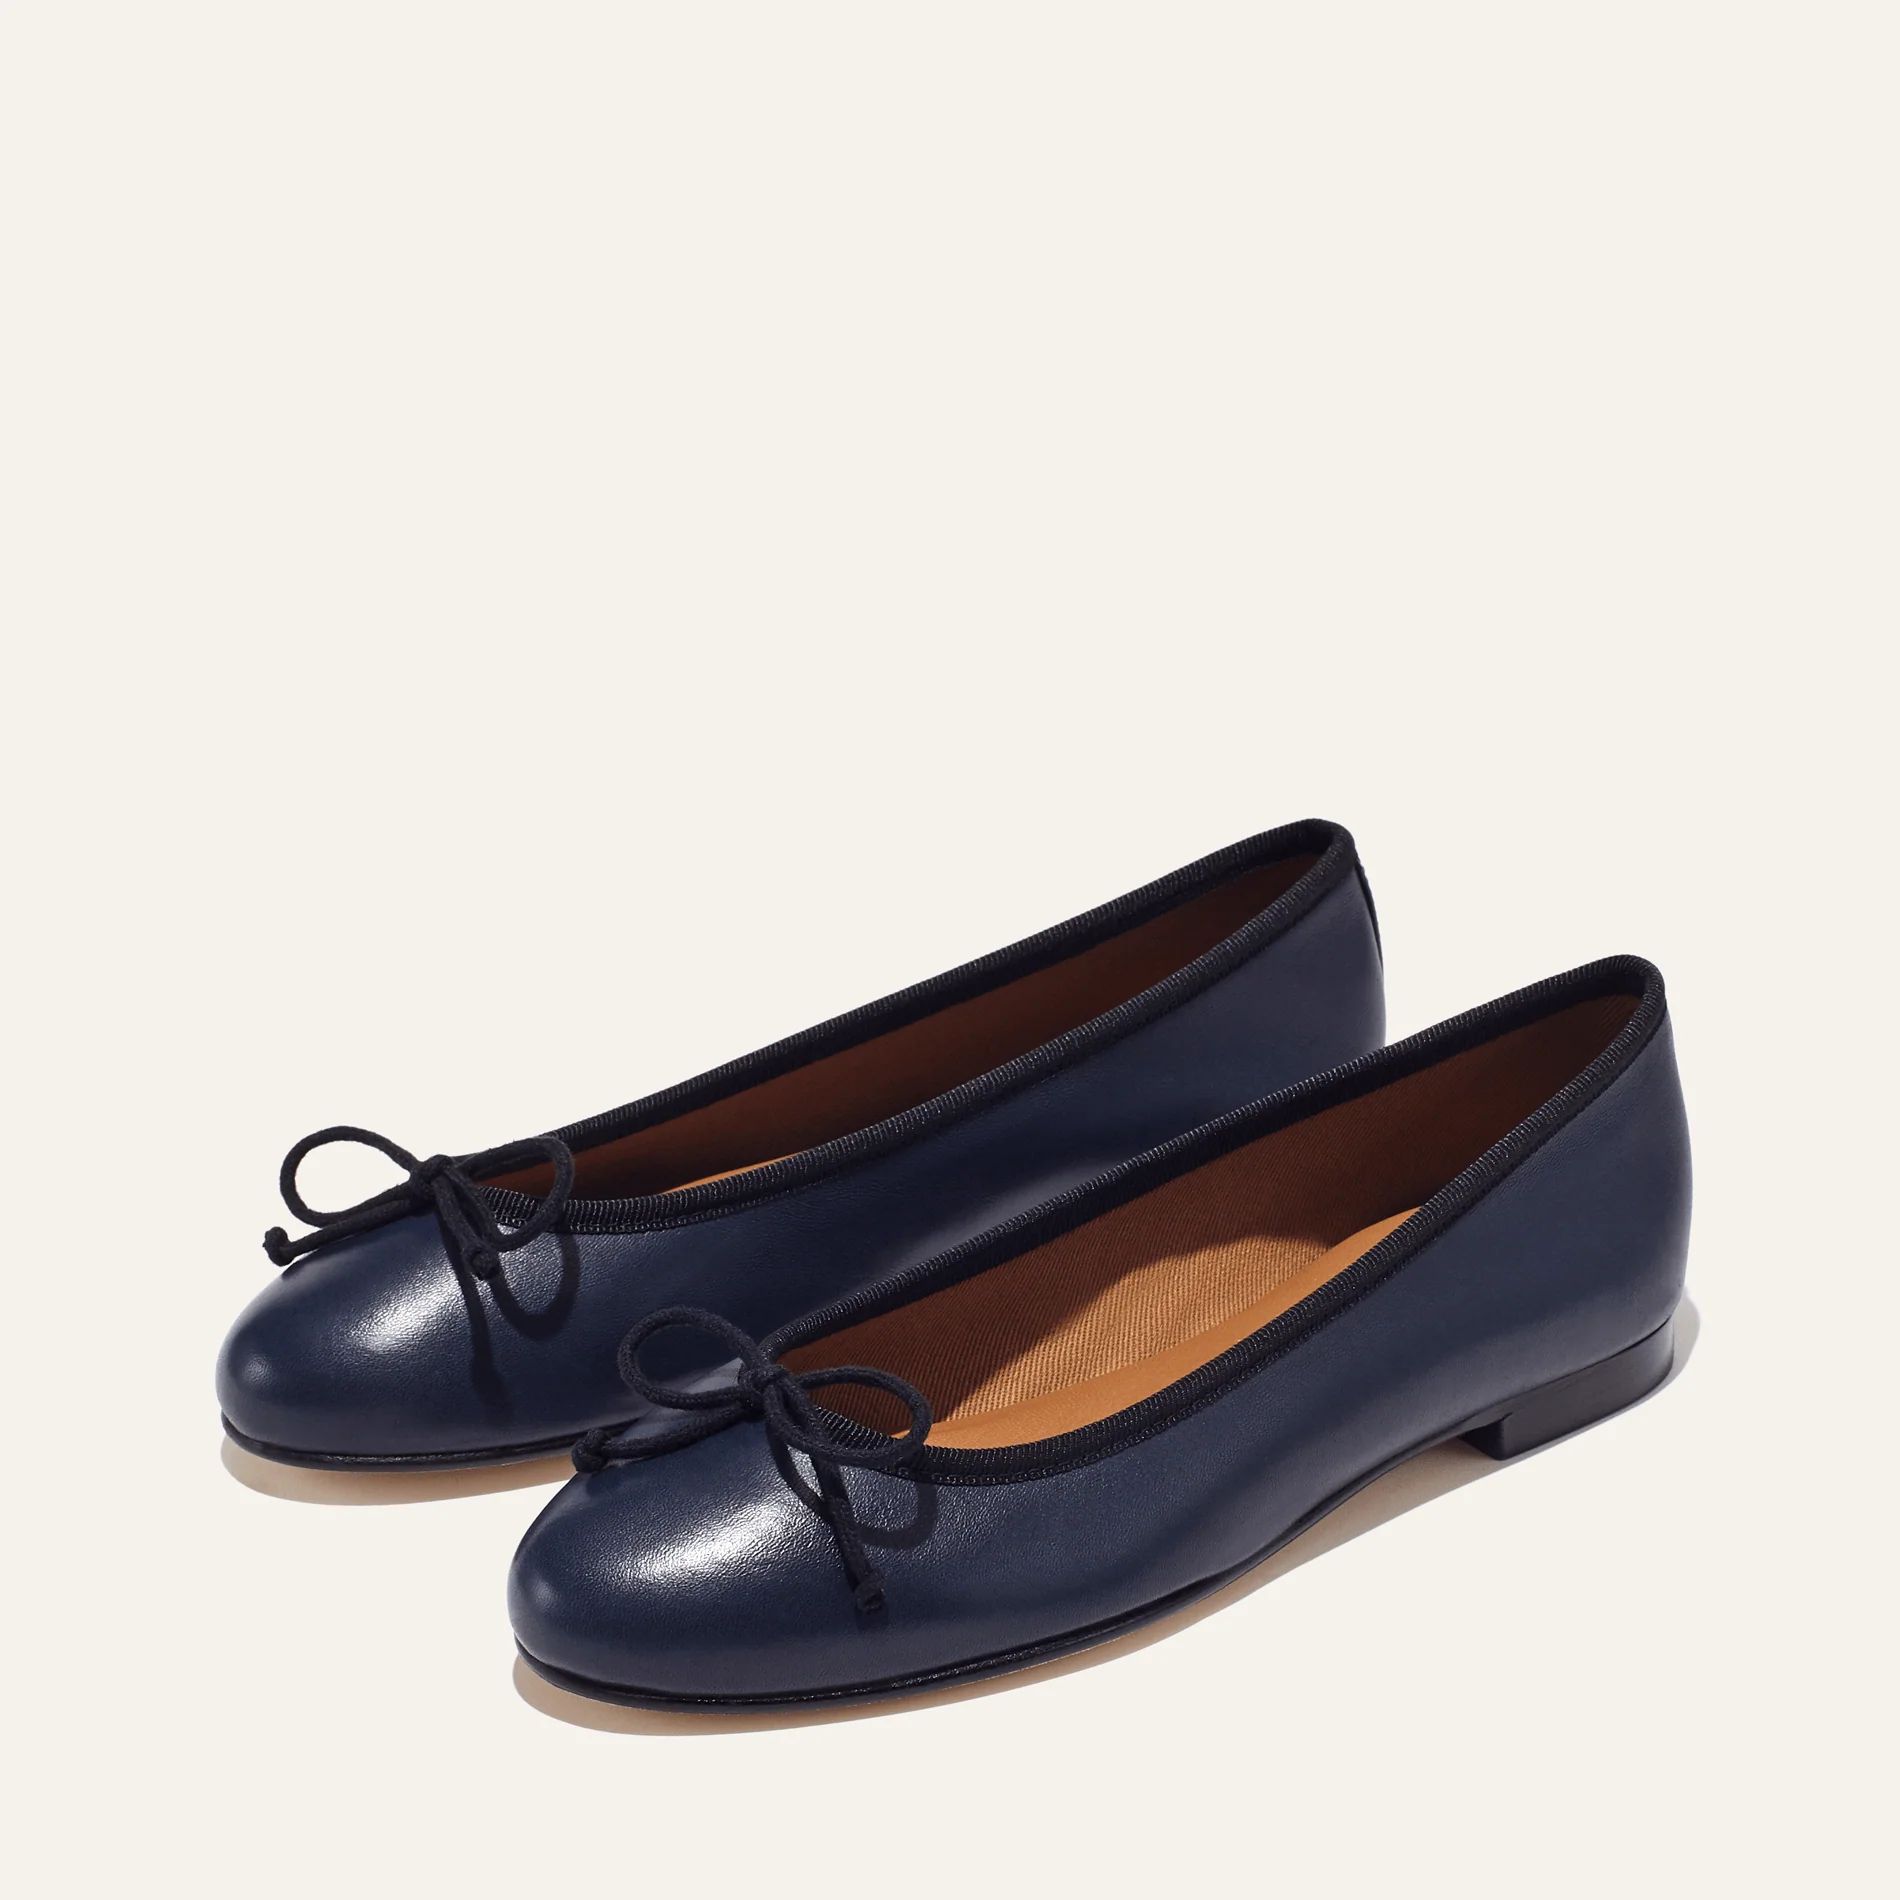 The Demi - Black and Navy Nappa | Margaux